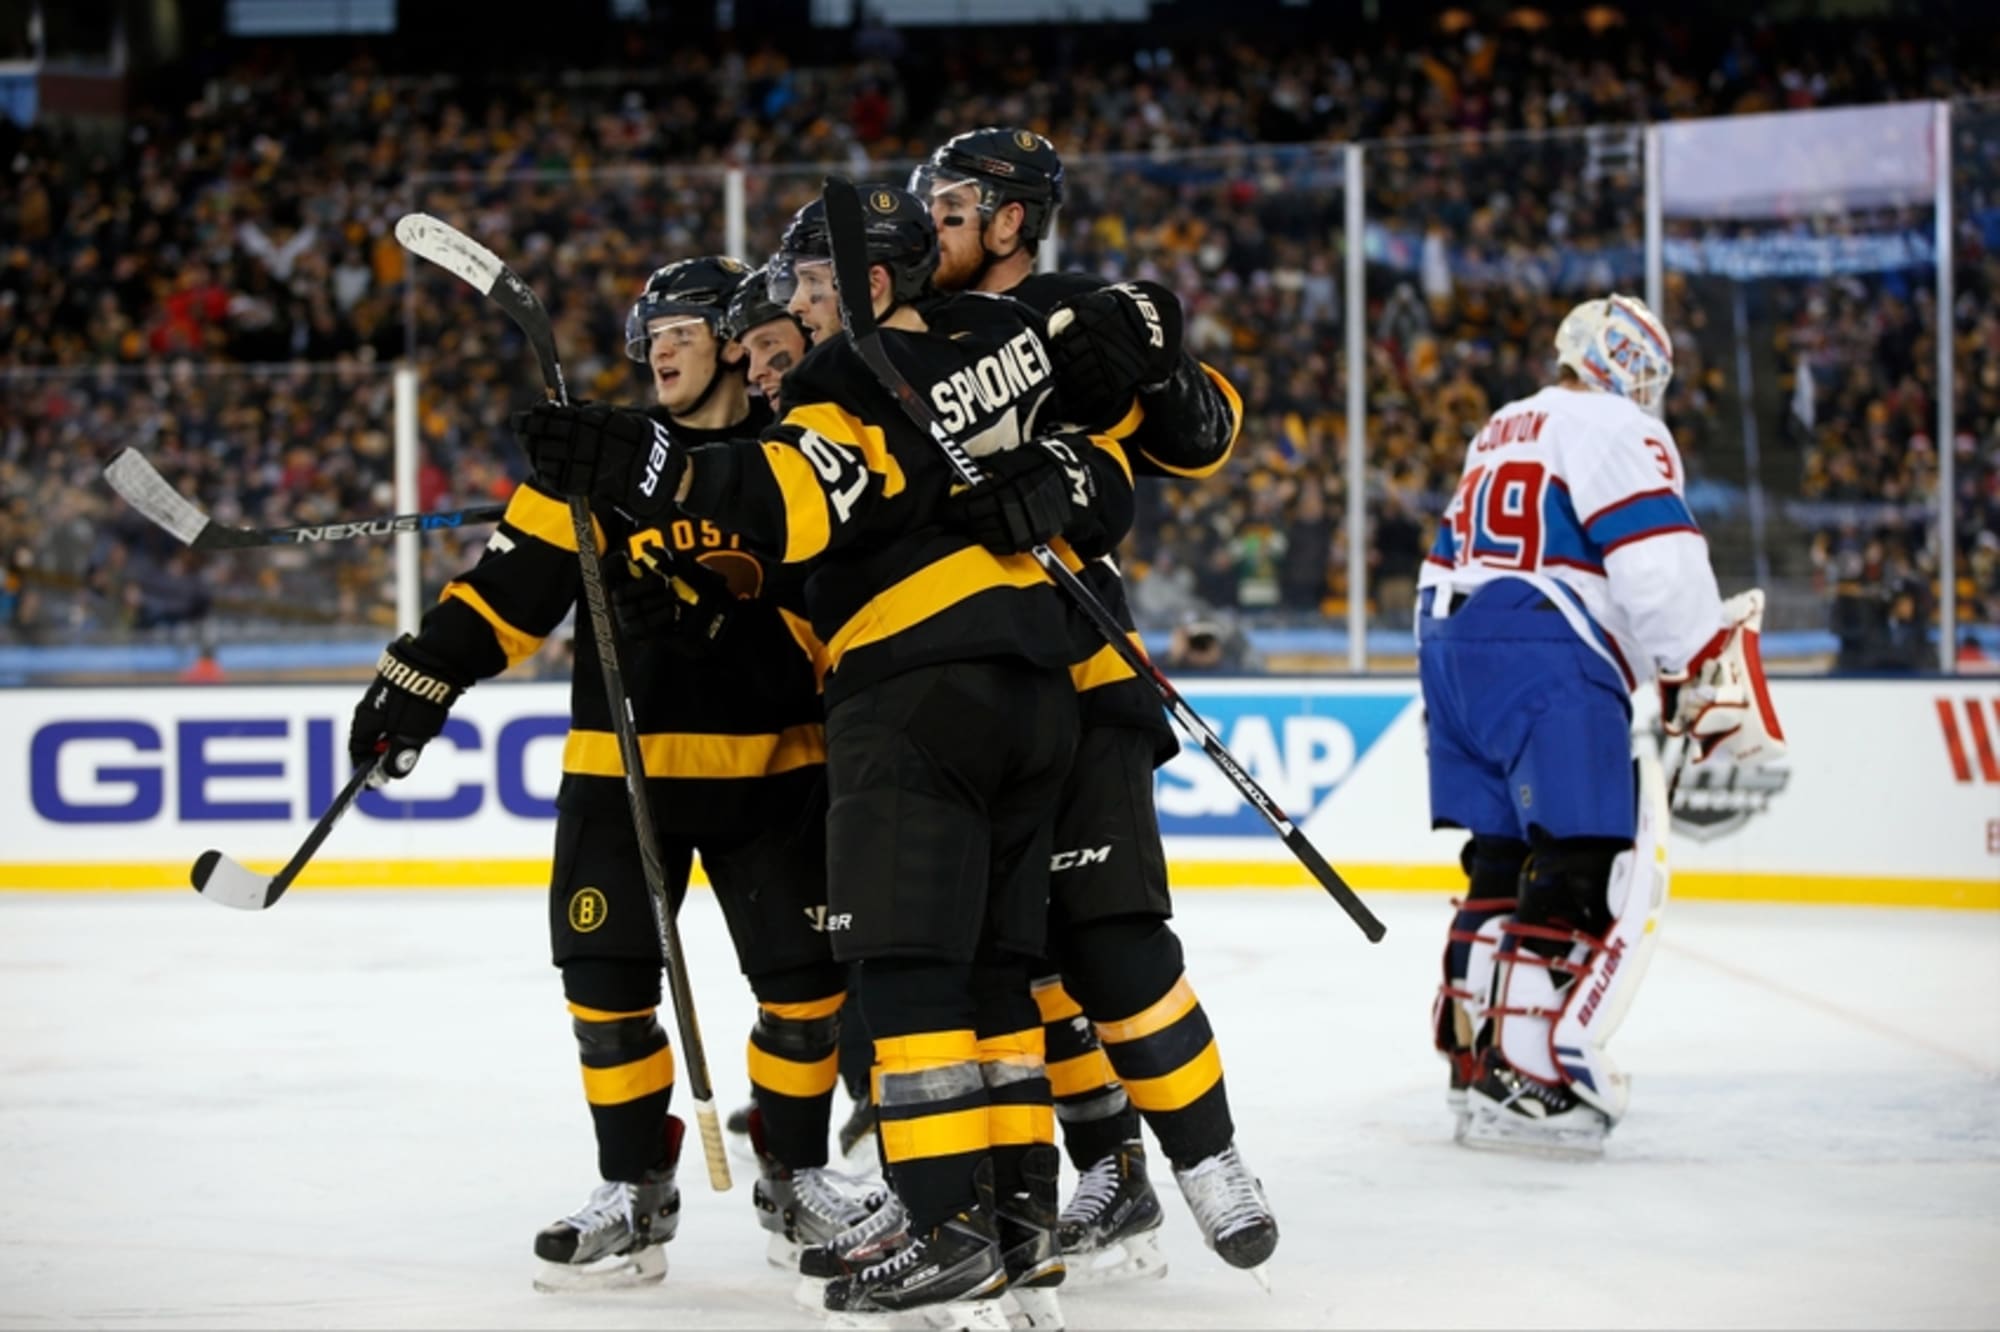 Boston Bruins: Winter Classic Loss Brings Roster Moves